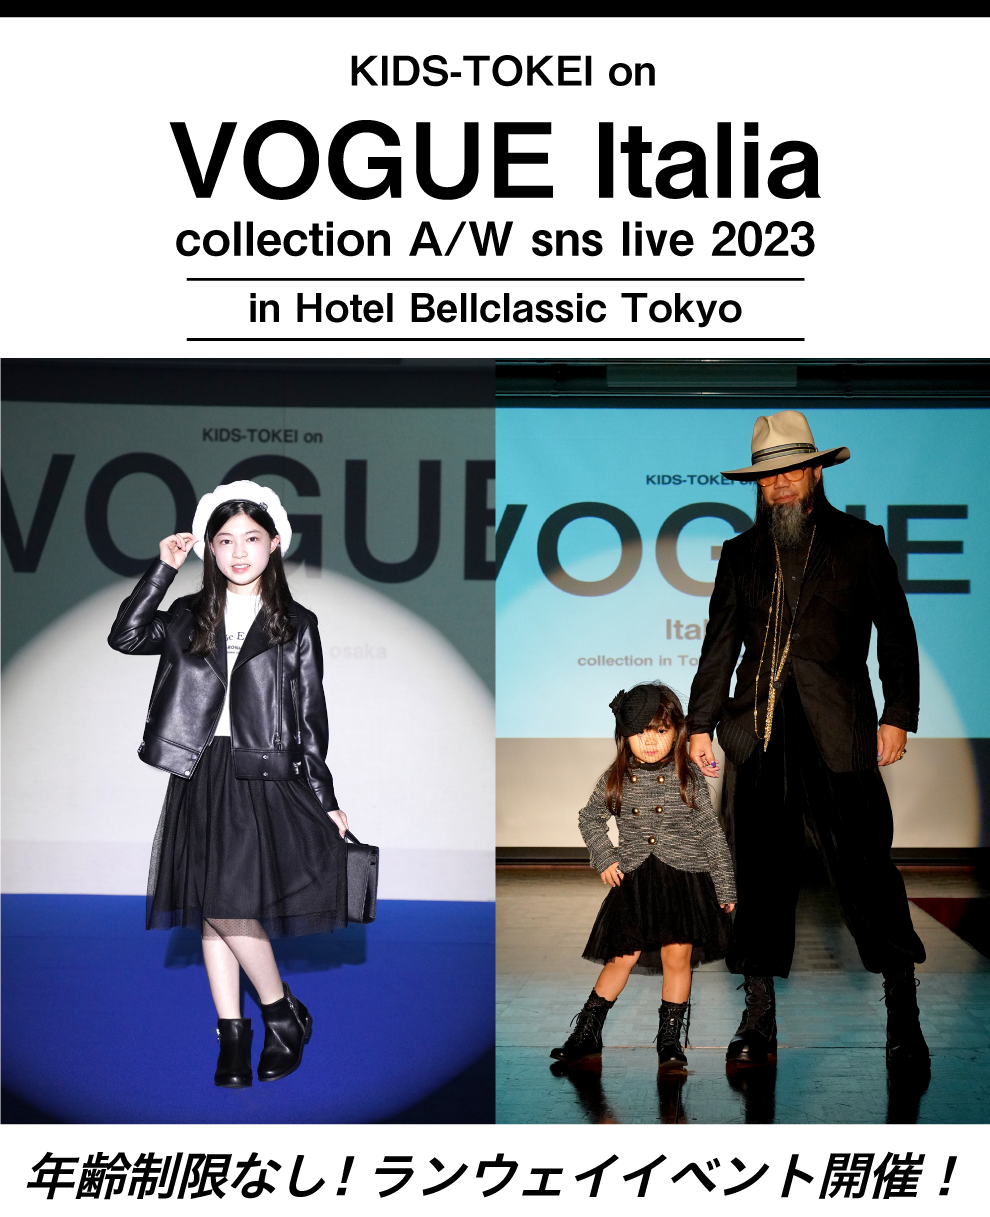 KIDS-TOKEI on VOGUE italia collection A/W sns live 2023 in Hotel 